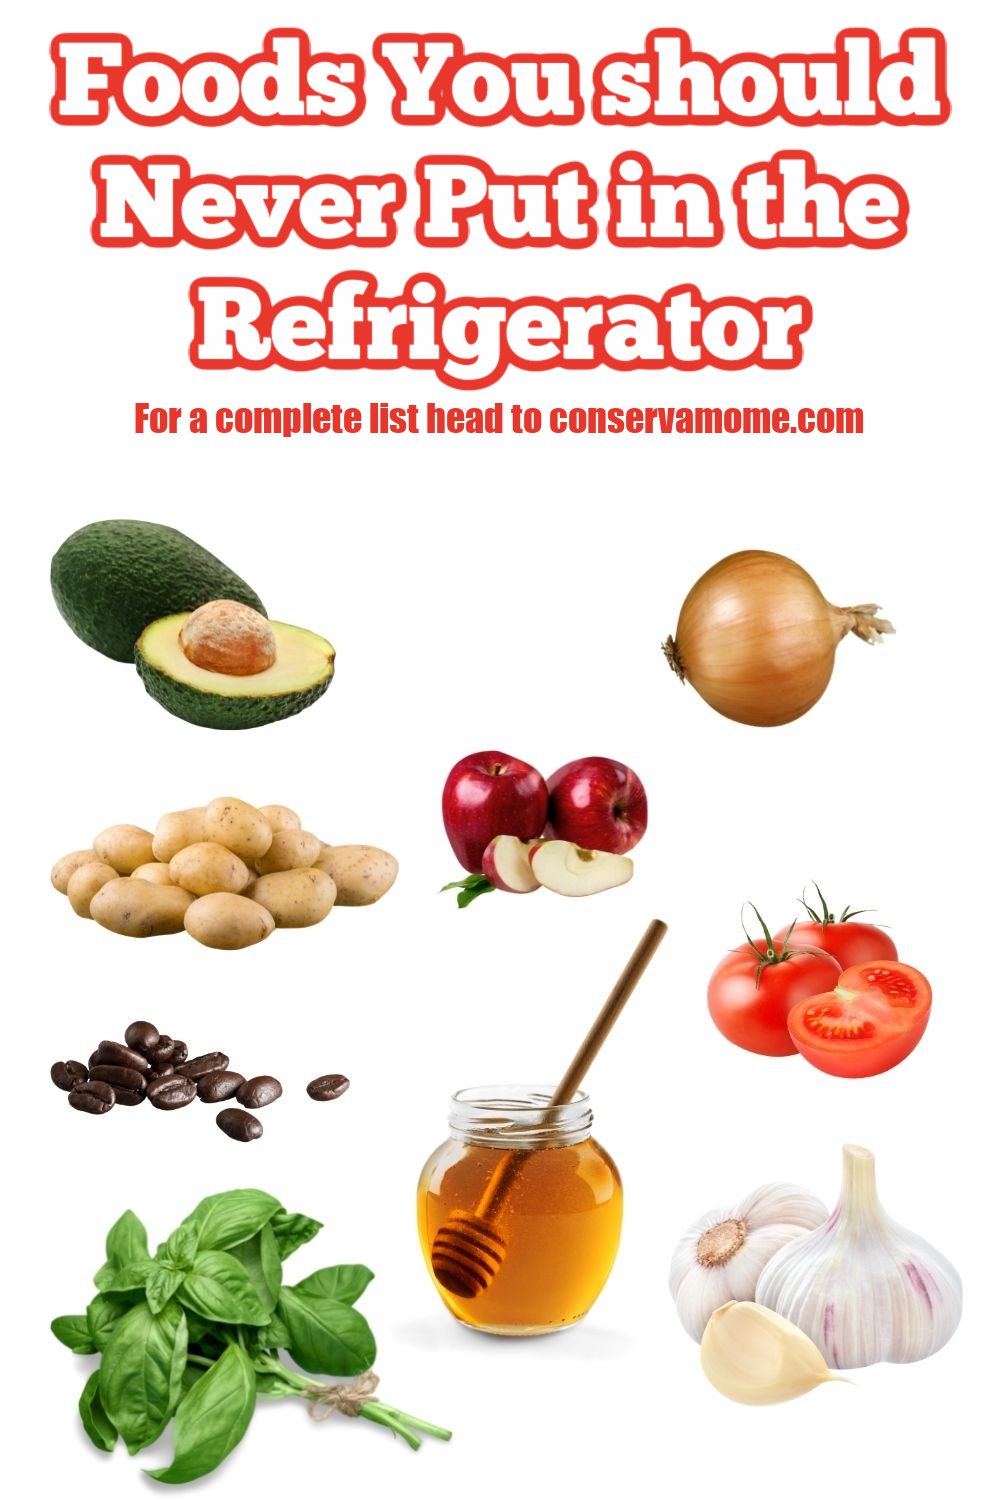 Foods you should not store in the refrigerator 